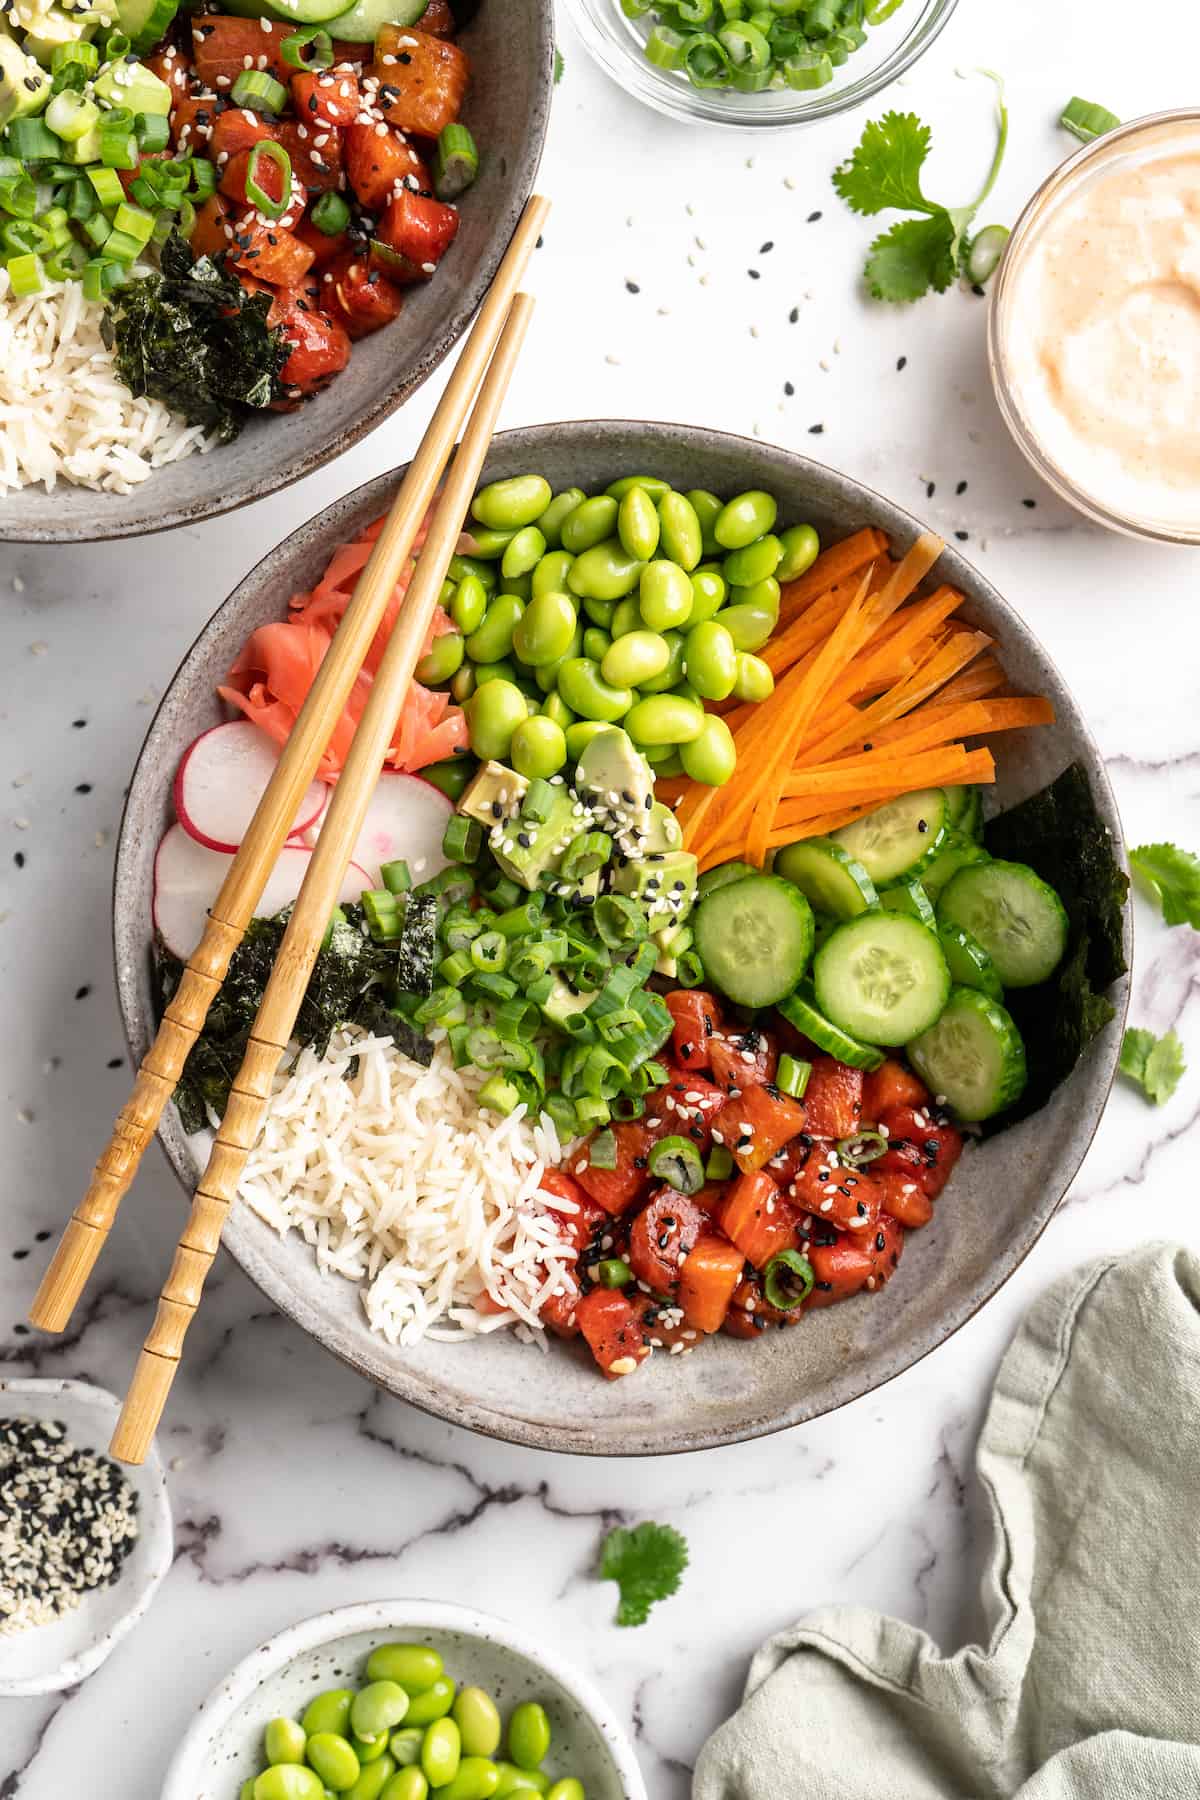 Overhead view of vegan poke bowl with chopsticks on top, surrounded by toppings and garnishes